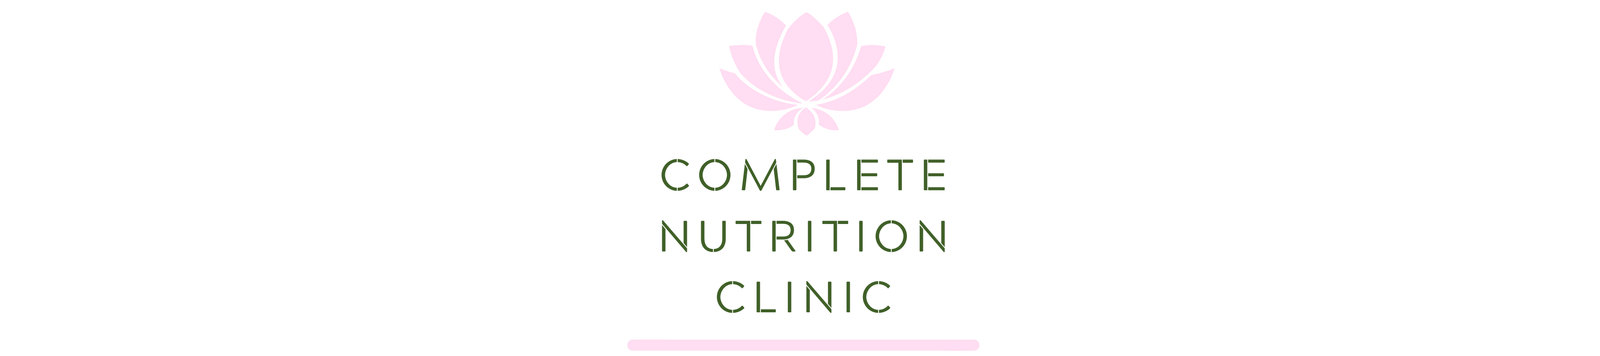 Complete Nutrition Clinic